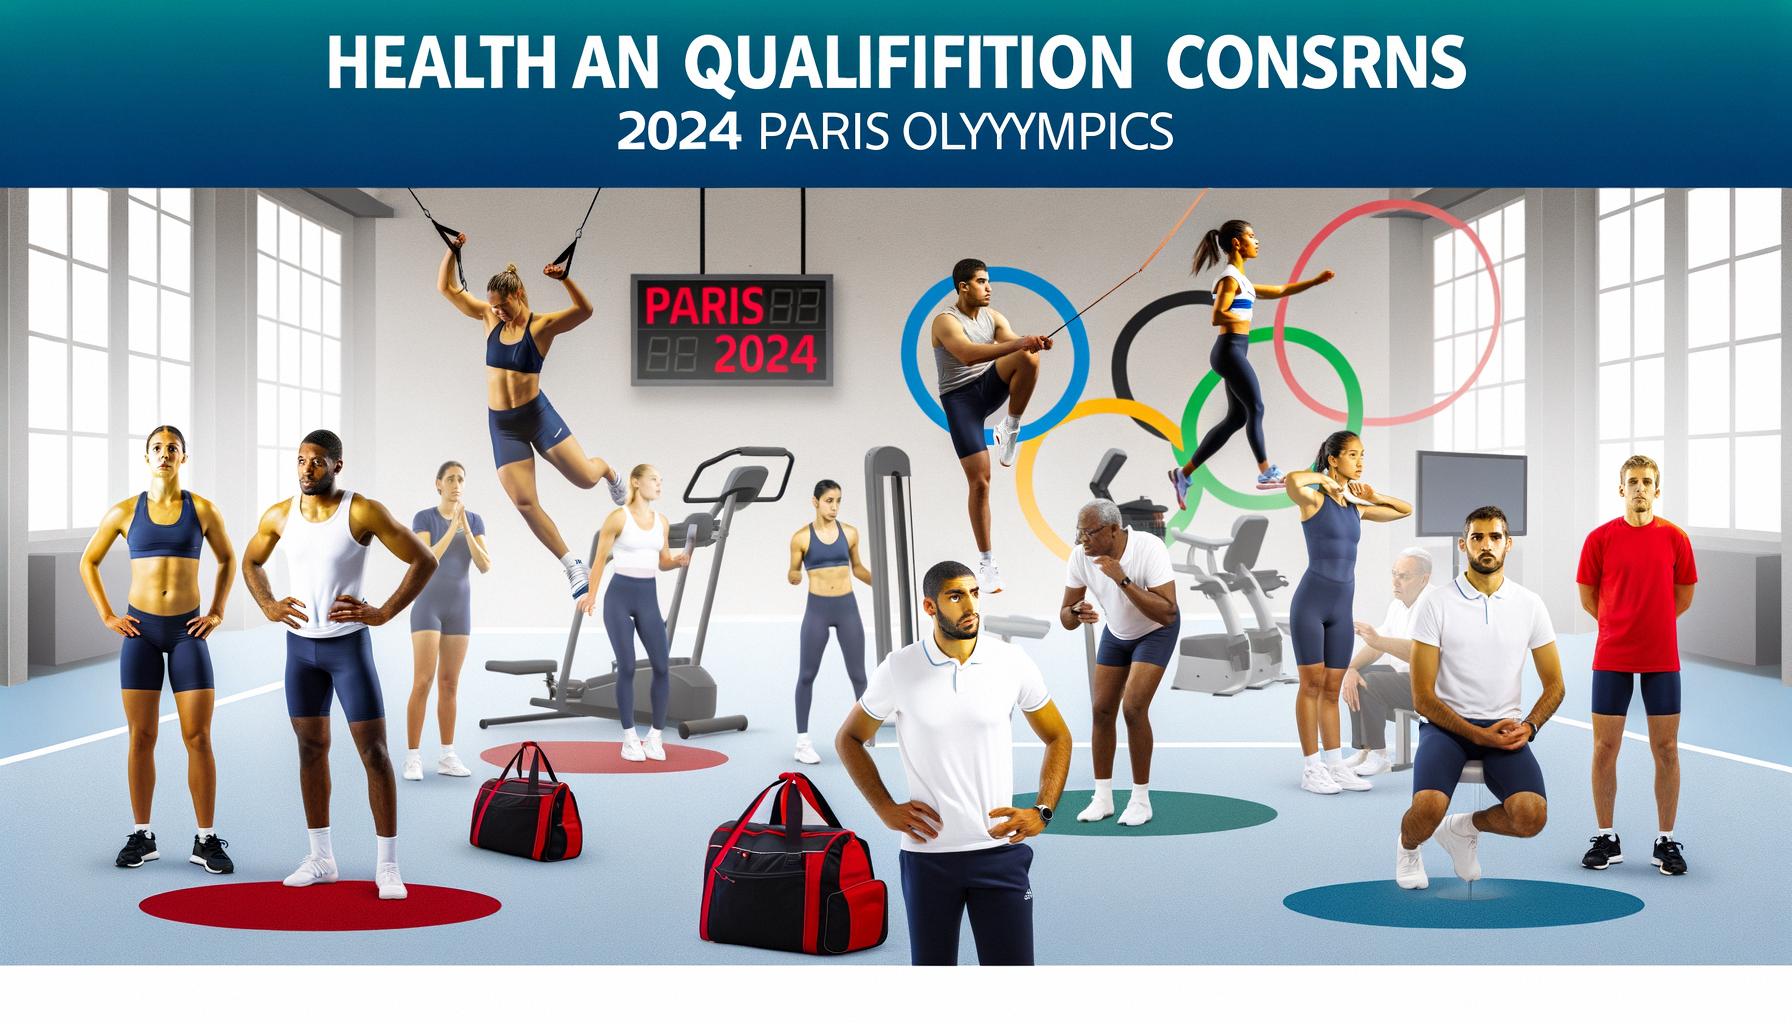 Health and qualification concerns for Olympic athletes ahead of Paris 2024